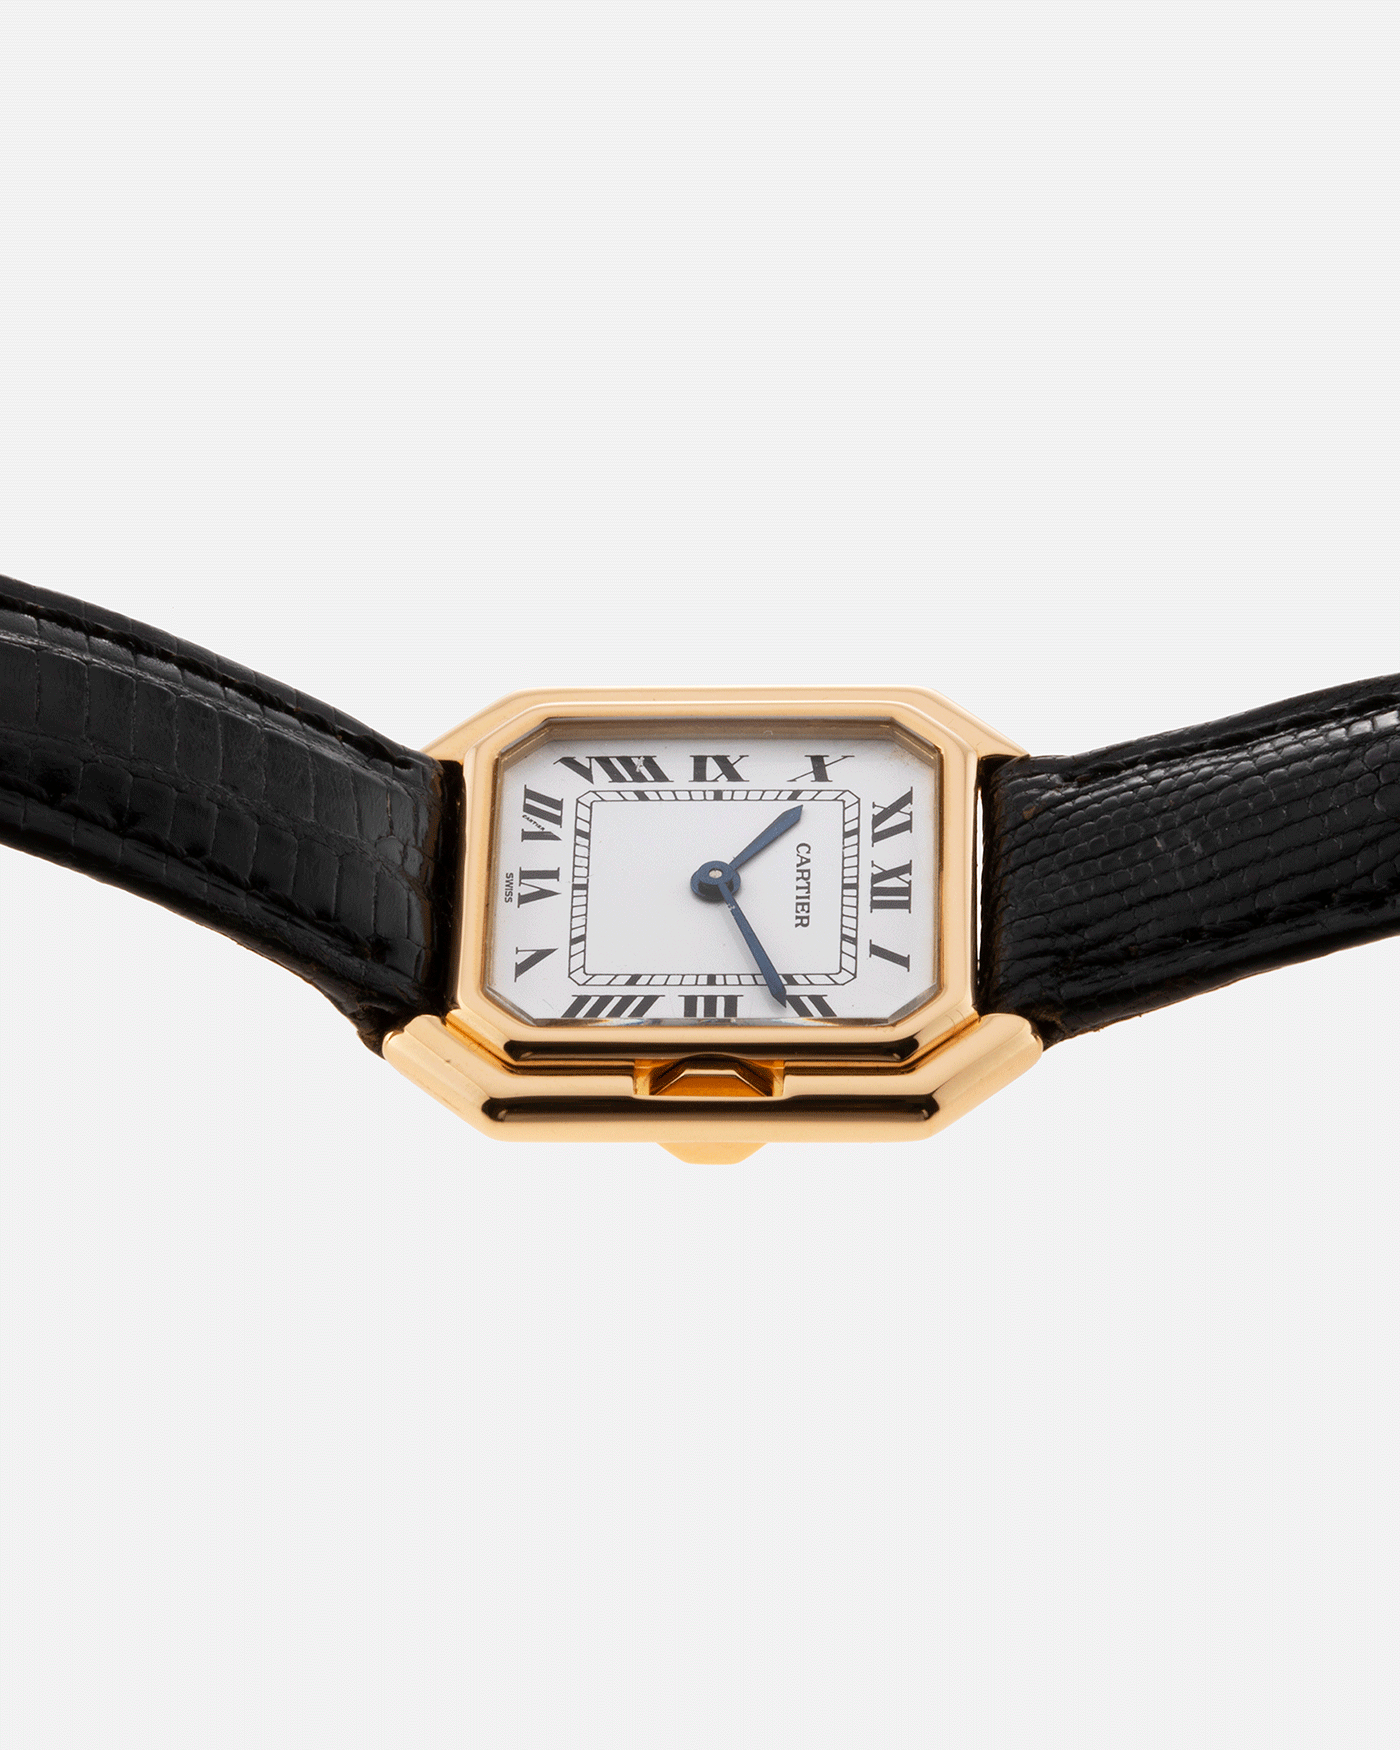 Brand: Cartier Year: 1970s Model: Ceinture Material: 18k Yellow Gold Movement: Manually Wound Cartier Cal. 78.1 Case Diameter: 25mm X 27mm Lug Width: 16mm Bracelet/Strap: Black Textured Leather Strap with Yellow Gold Cartier Buckle